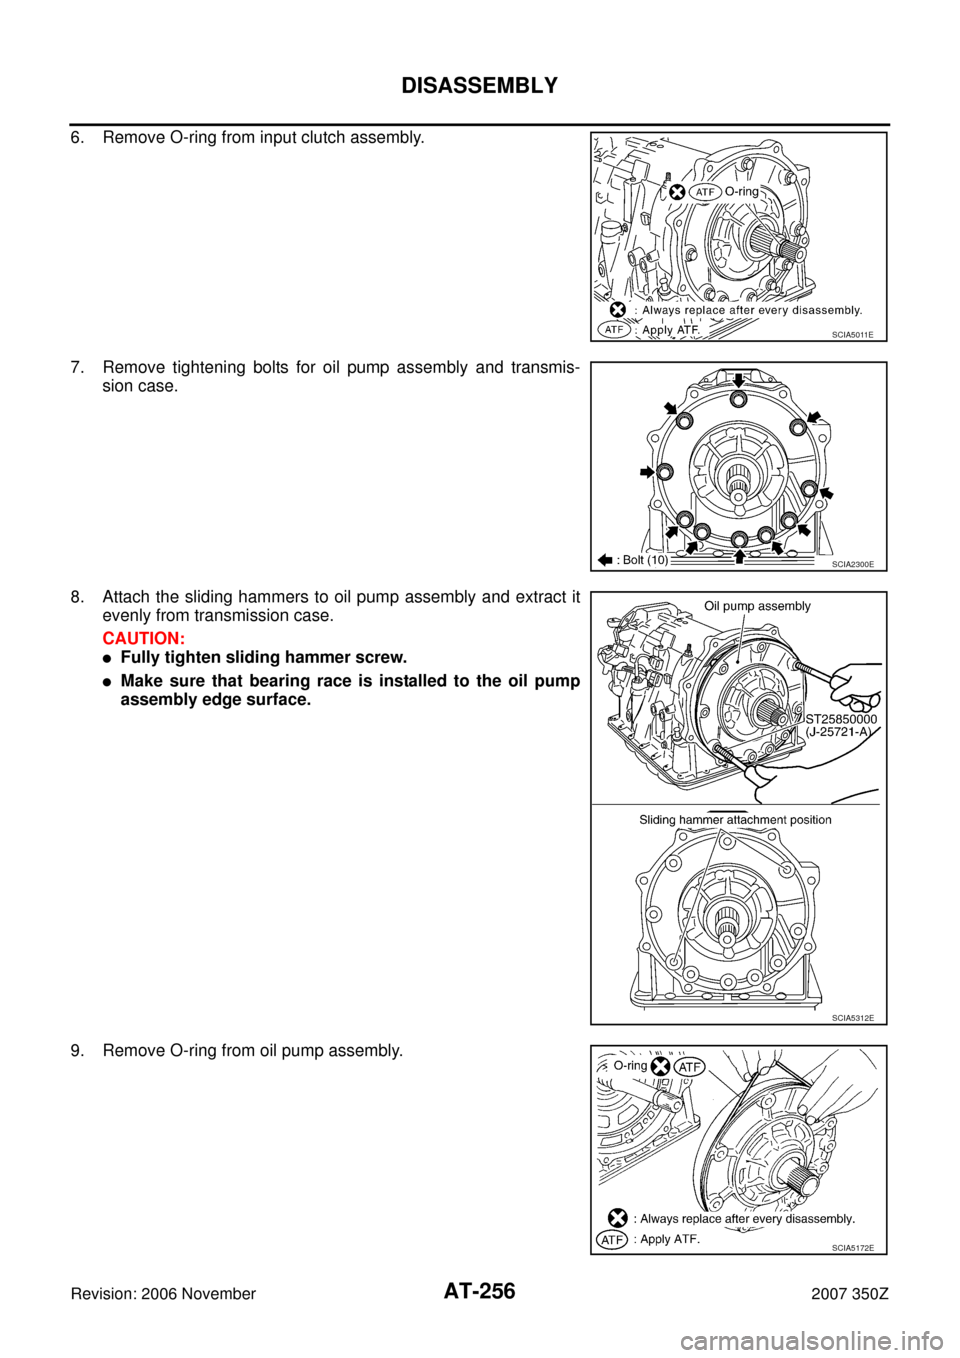 NISSAN 350Z 2007 Z33 Automatic Transmission Owners Manual AT-256
DISASSEMBLY
Revision: 2006 November2007 350Z
6. Remove O-ring from input clutch assembly.
7. Remove tightening bolts for oil pump assembly and transmis-
sion case.
8. Attach the sliding hammers